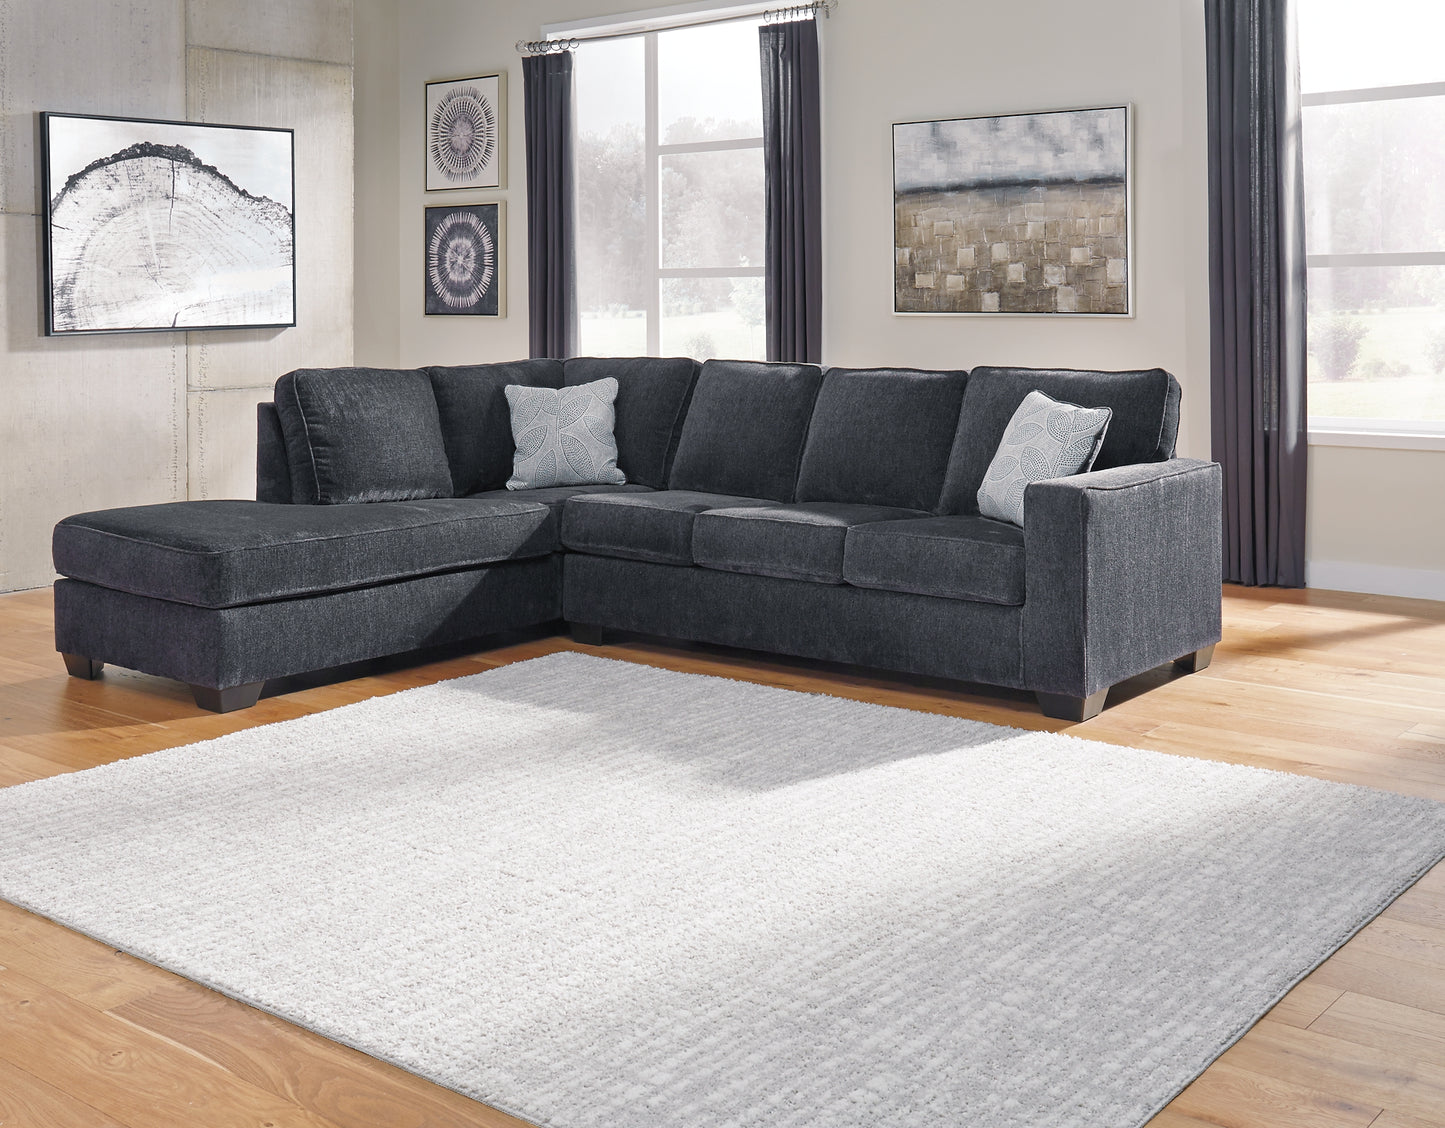 Altari 2-Piece Sleeper Sectional with Chaise JB's Furniture  Home Furniture, Home Decor, Furniture Store